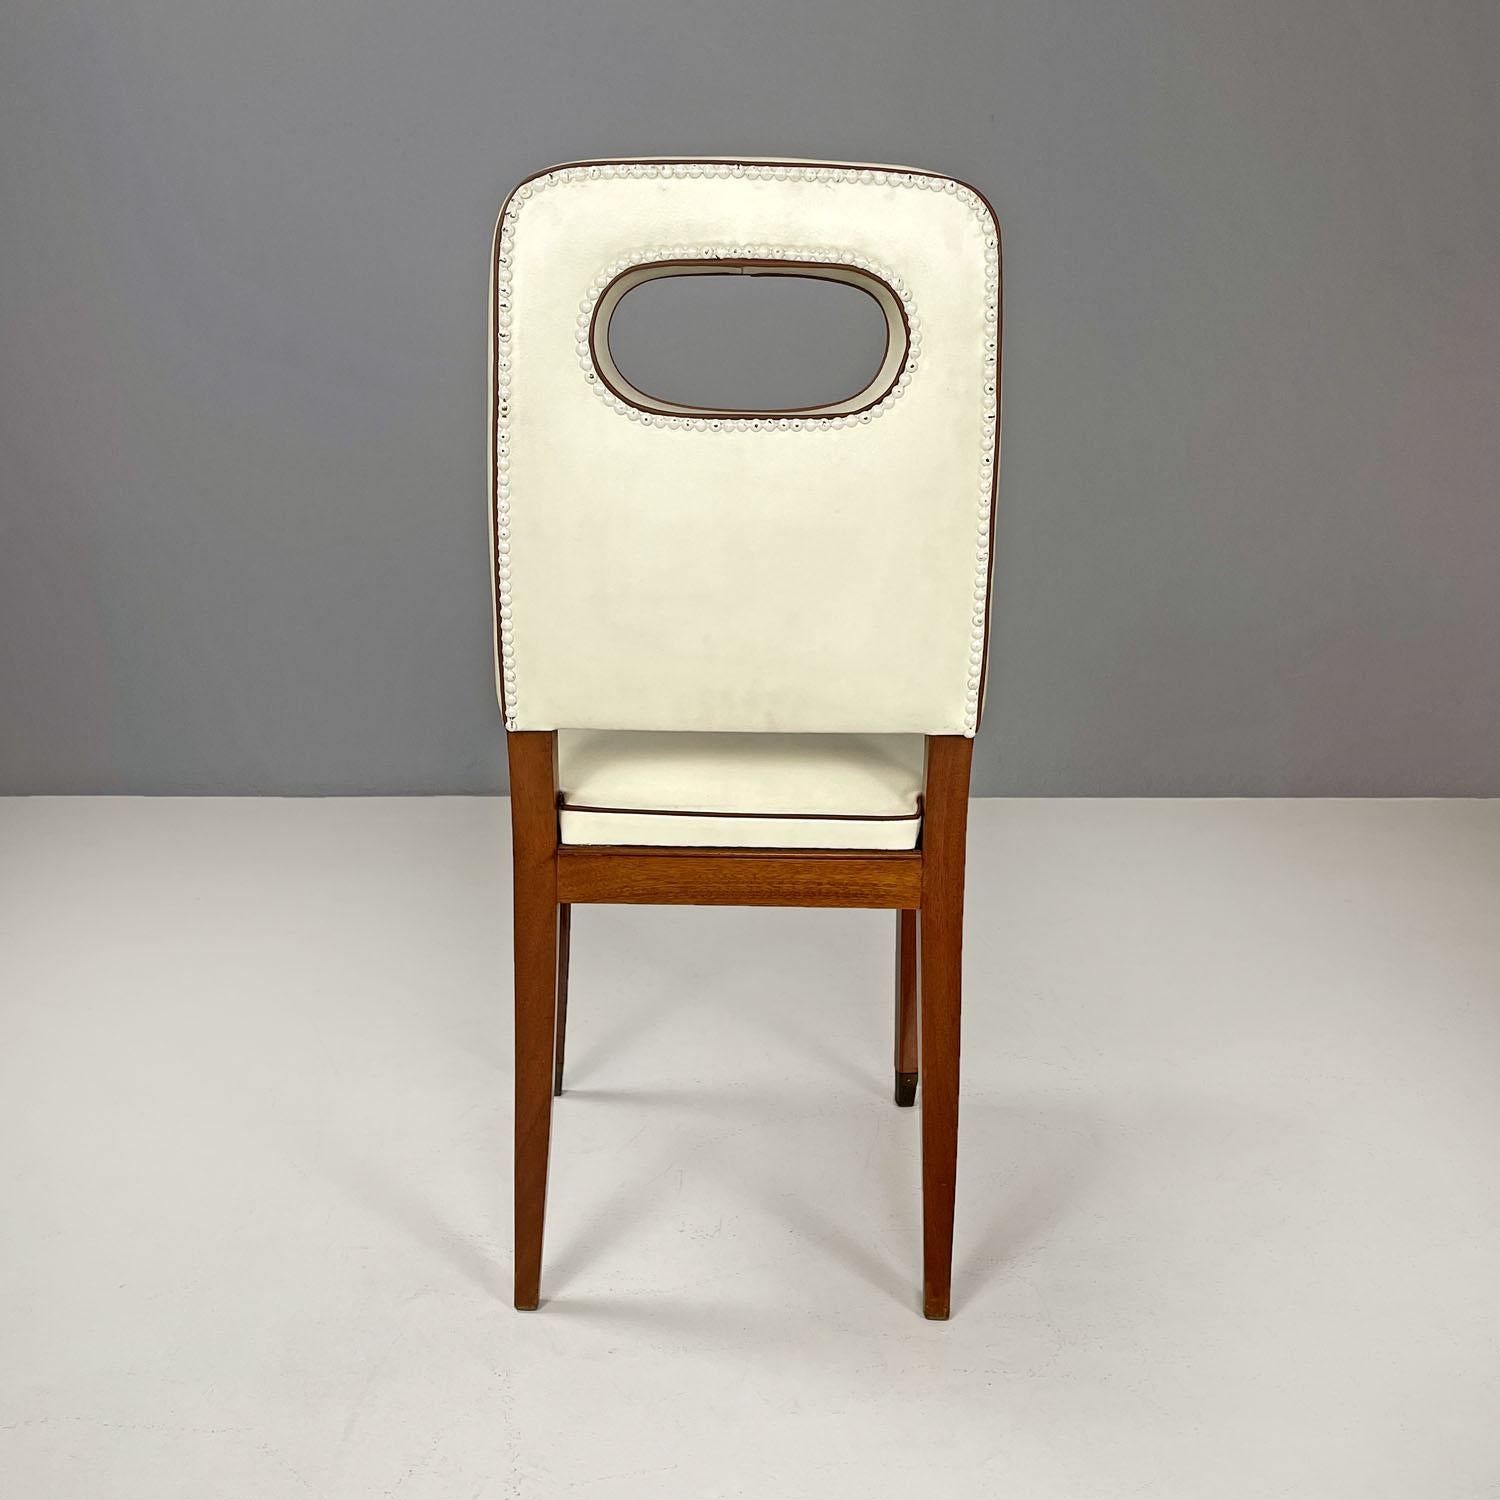 Brass Italian Art Deco white leather and wood chairs by Giovanni Gariboldi, 1940s For Sale